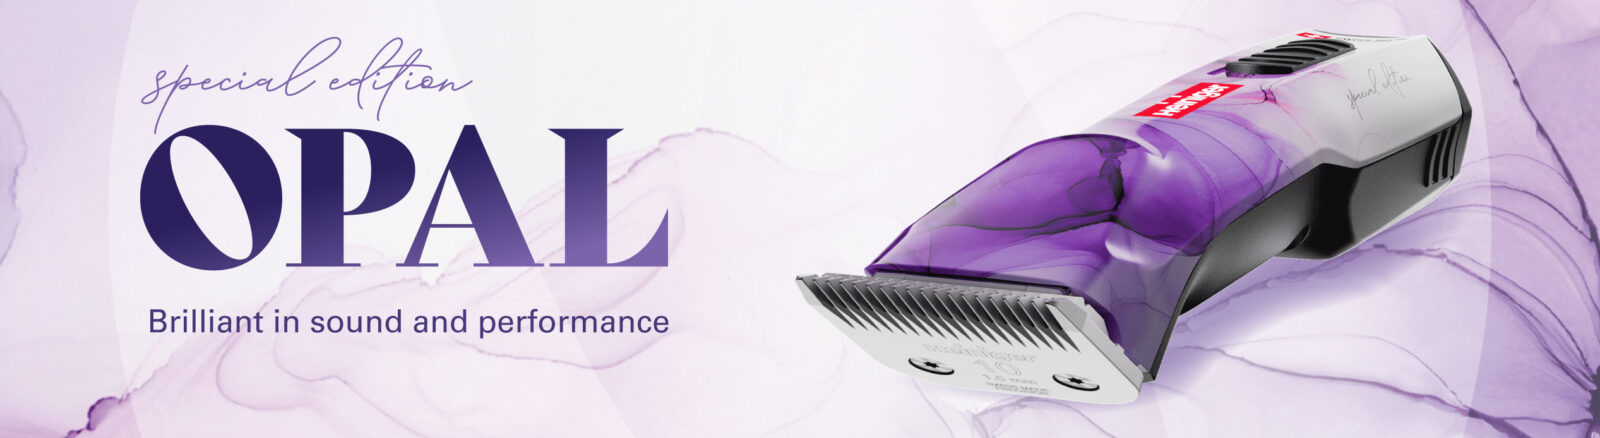 Opal Special Edition Website Landing Page Banner